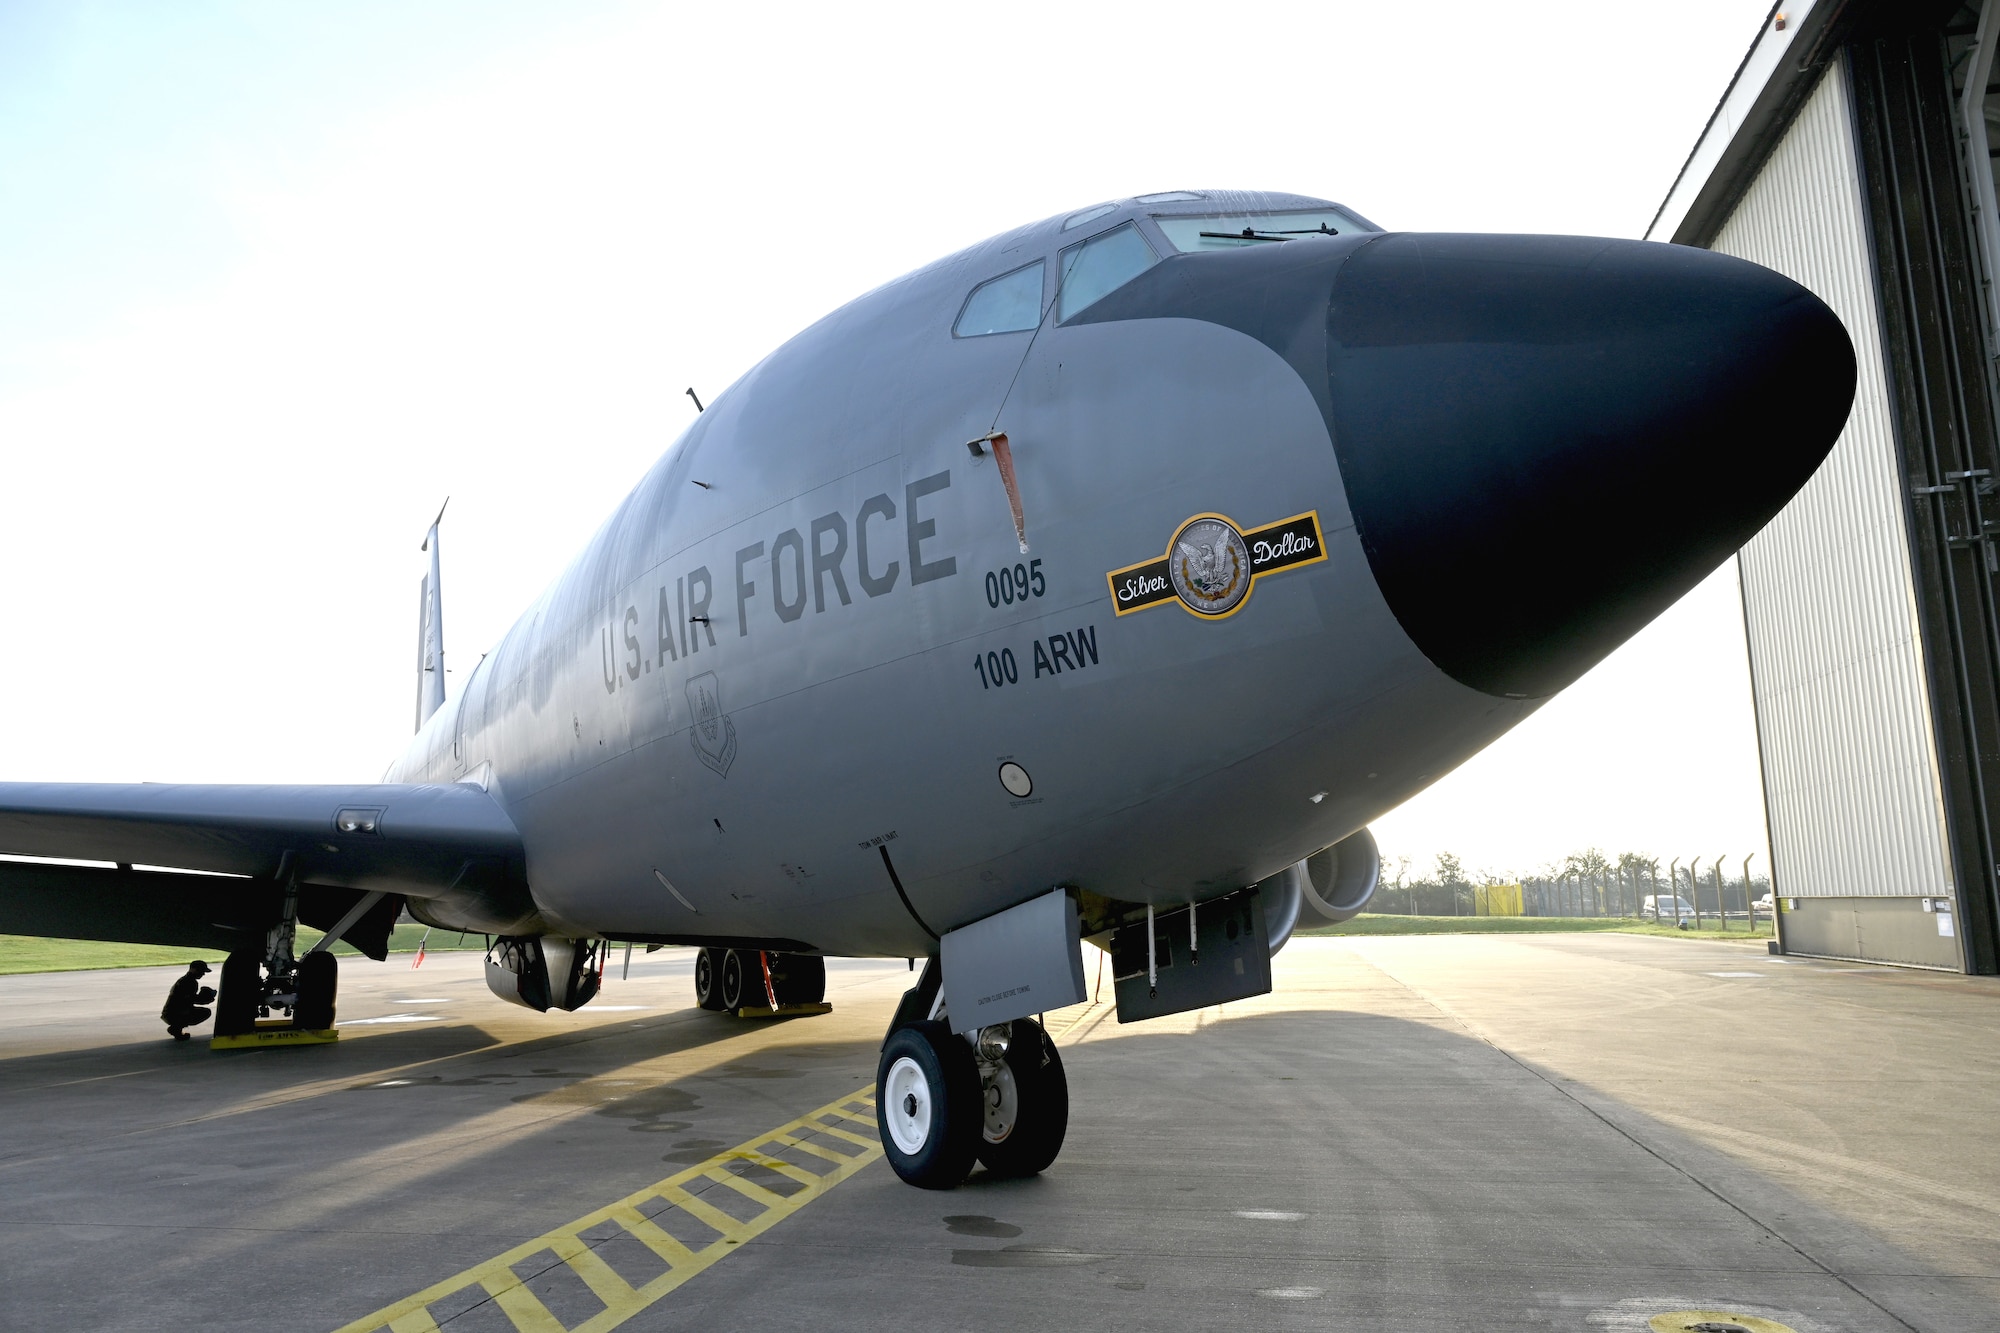 The latest of the 100th Air Refueling Wing’s heritage nose art, “Silver Dollar” is shown off after its unveiling during the nose art dedication ceremony at Royal Air Force Mildenhall, England, Oct. 10, 2023. The nose art, based on one from the 100th Bomb Group at Thorpe Abbotts, Norfolk, England, during World War II. U.S. Air Force Staff Sgt. Tyler Goldsborough, formerly 100th Aircraft Maintenance Squadron, now based at Tinker Air Force Base, Okla., designed the updated nose art – the first of RAF Mildenhall’s tanker fleet to sport double-sided nose art based on a Silver Dollar coin – now showcased on the side of a KC-135 Stratotanker. (U.S. Air Force photo by Karen Abeyasekere)